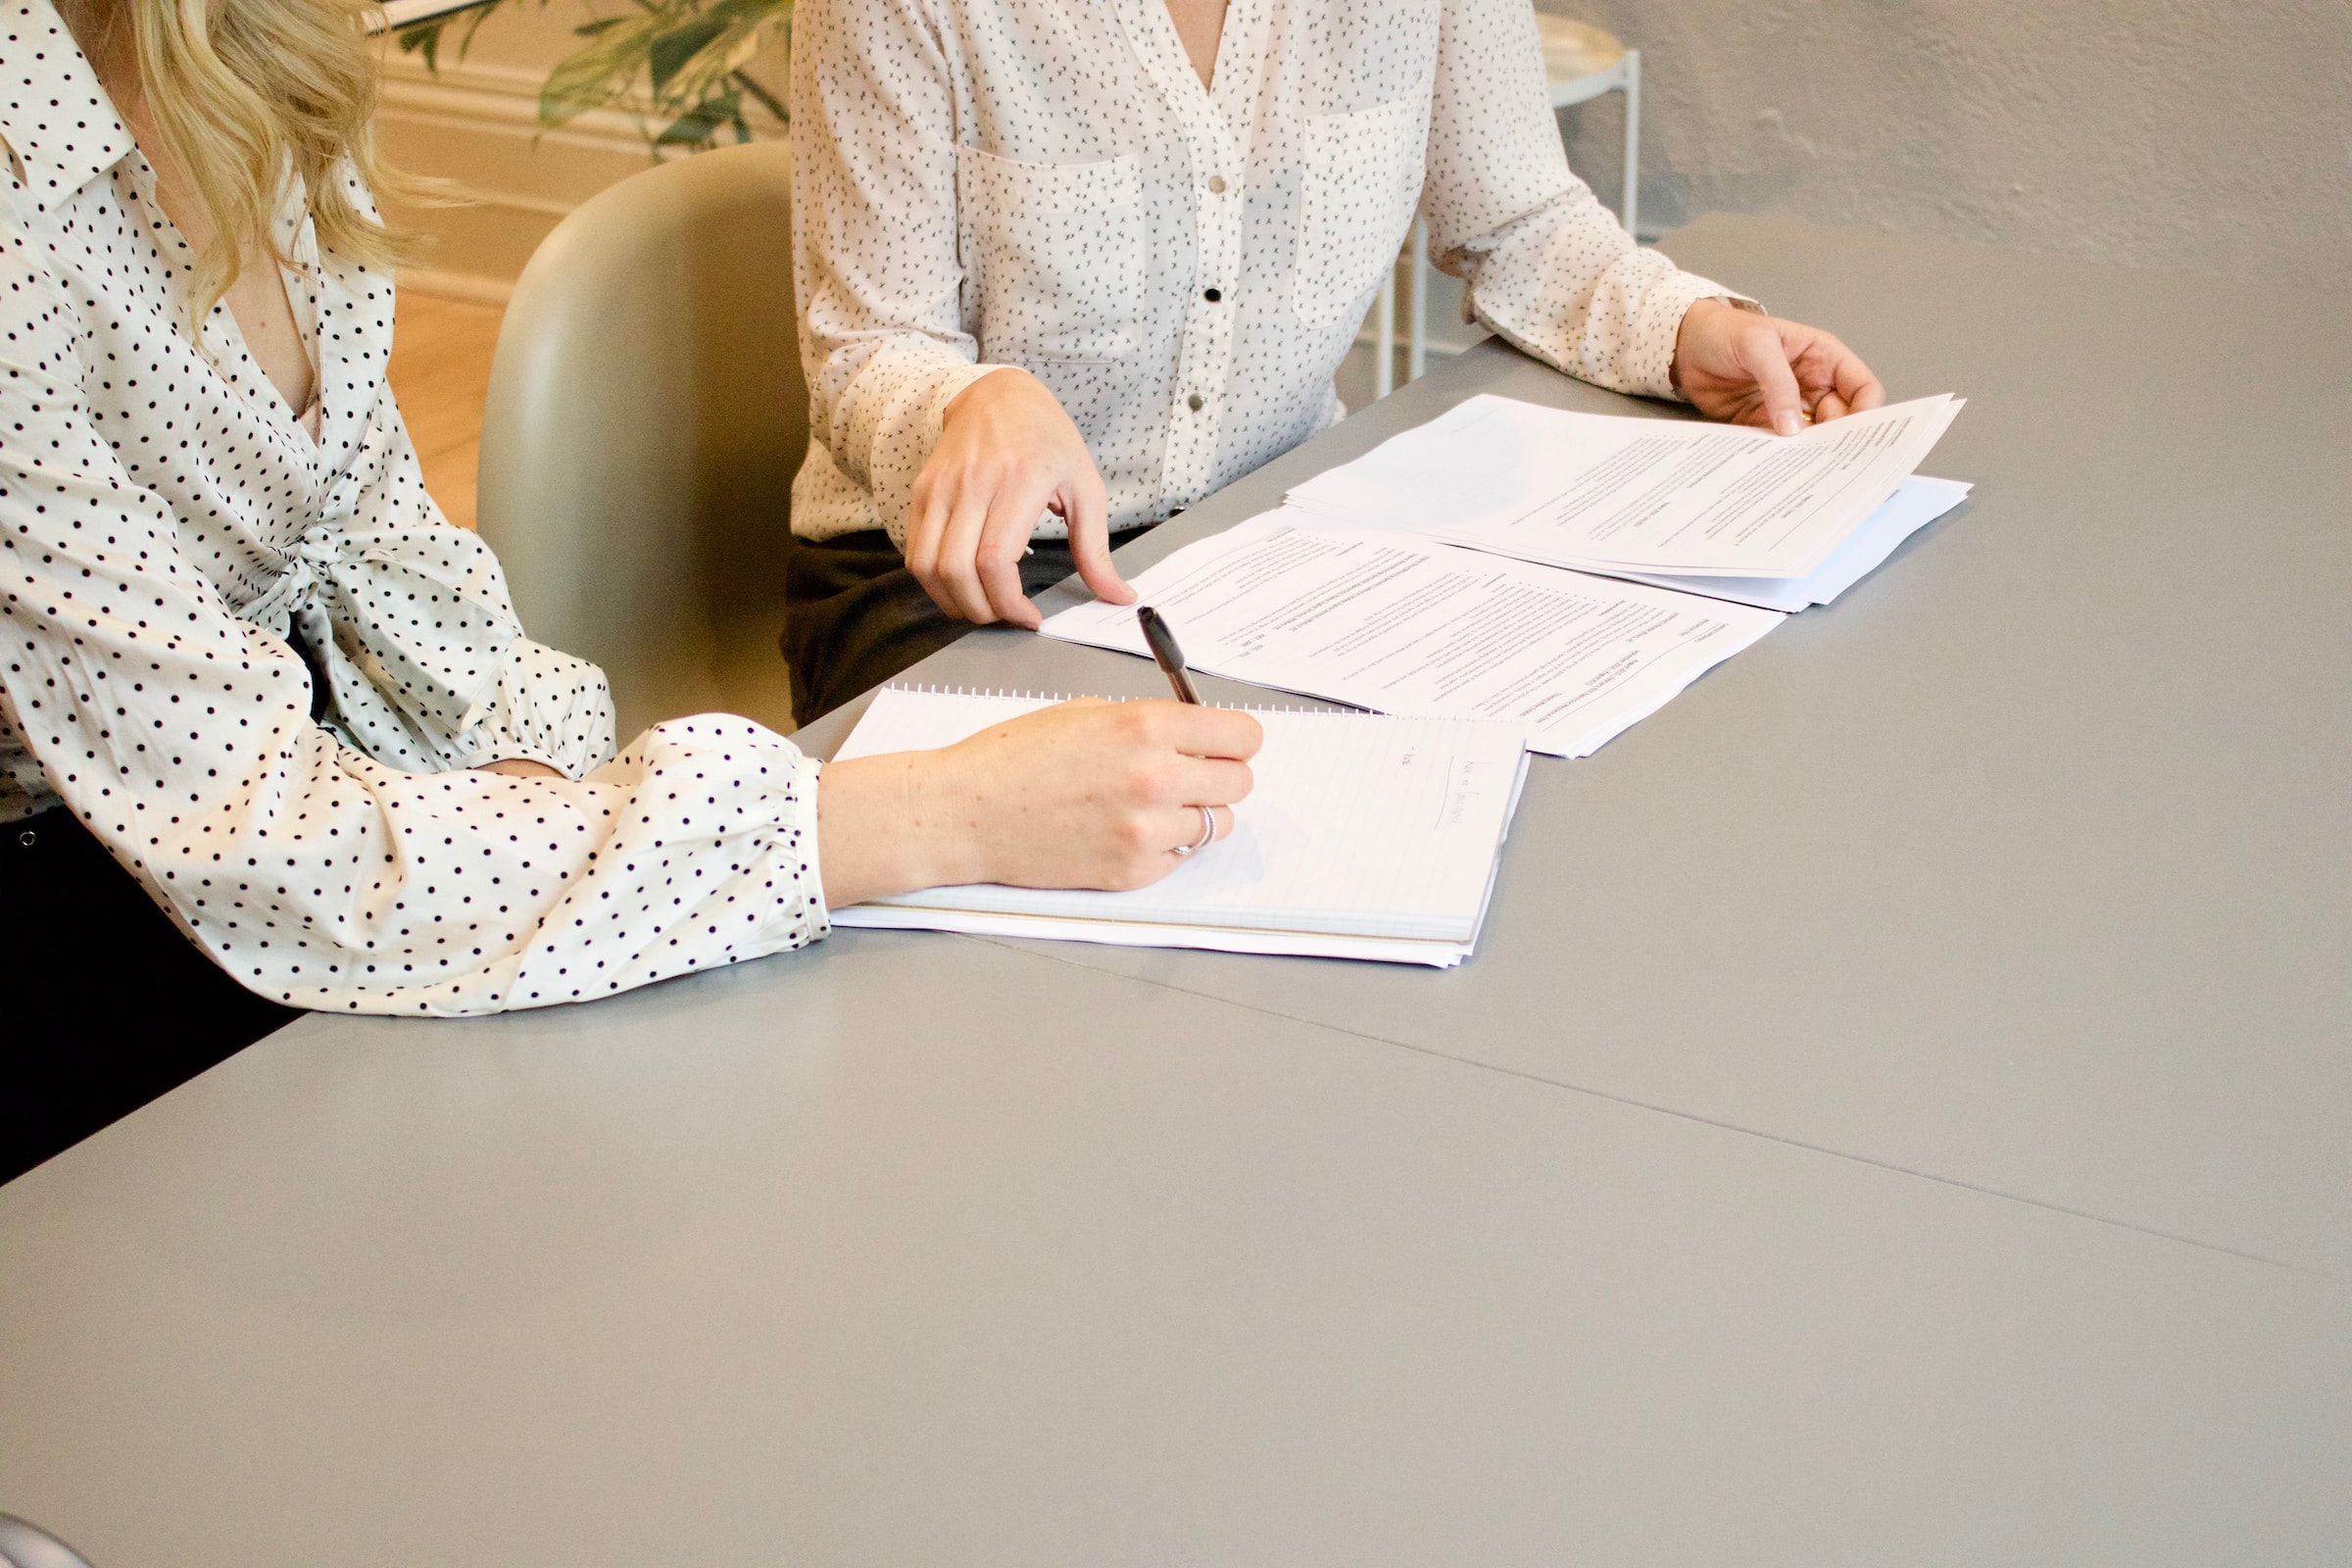 two white women sitting down at table signing papers